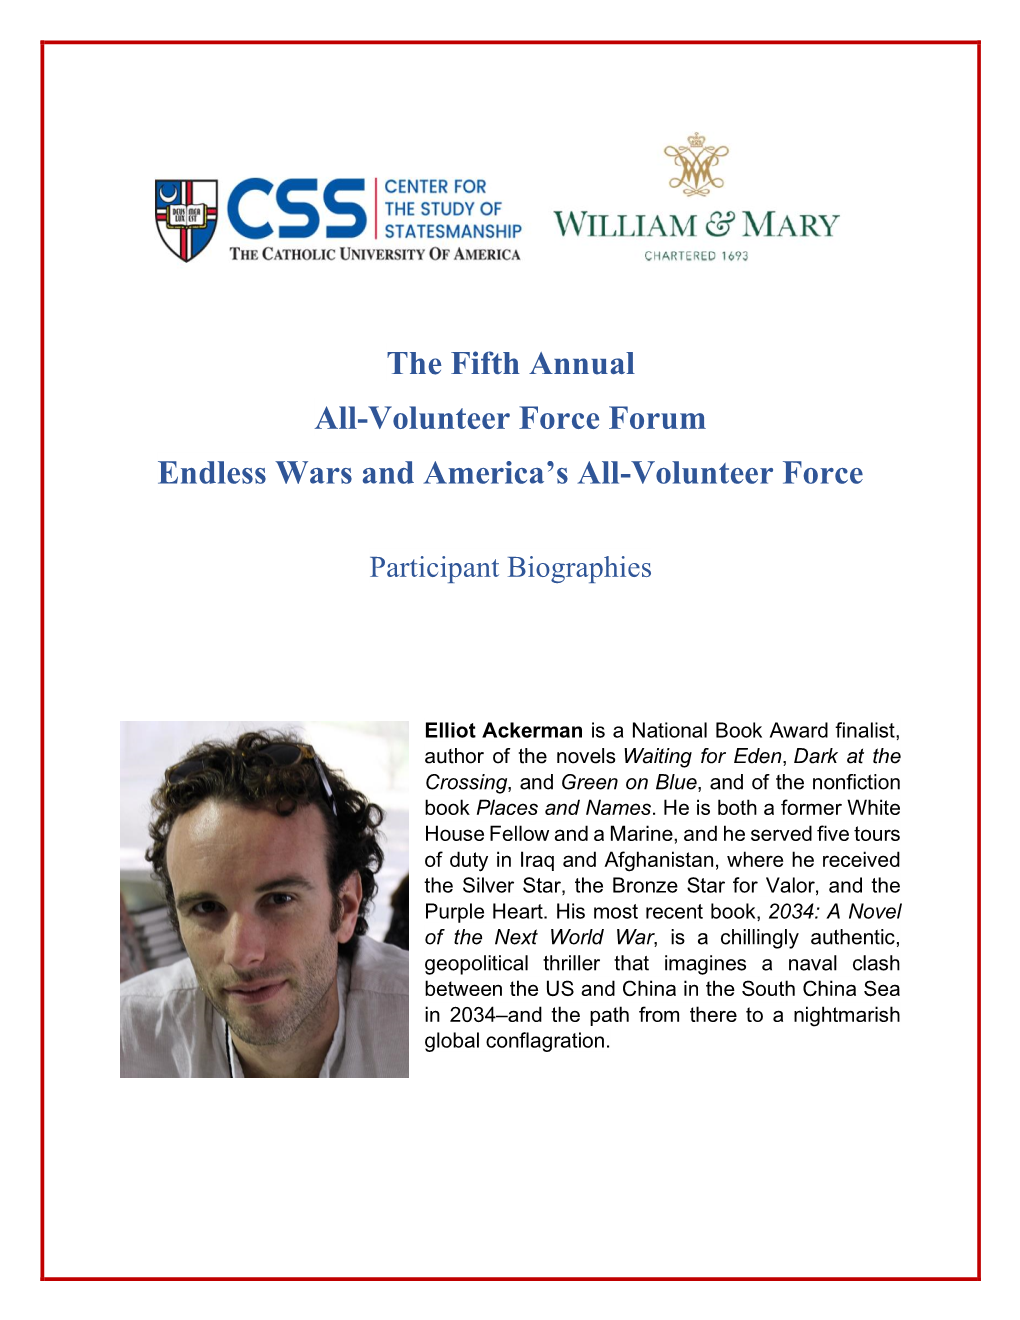 The Fifth Annual All-Volunteer Force Forum Endless Wars and America’S All-Volunteer Force